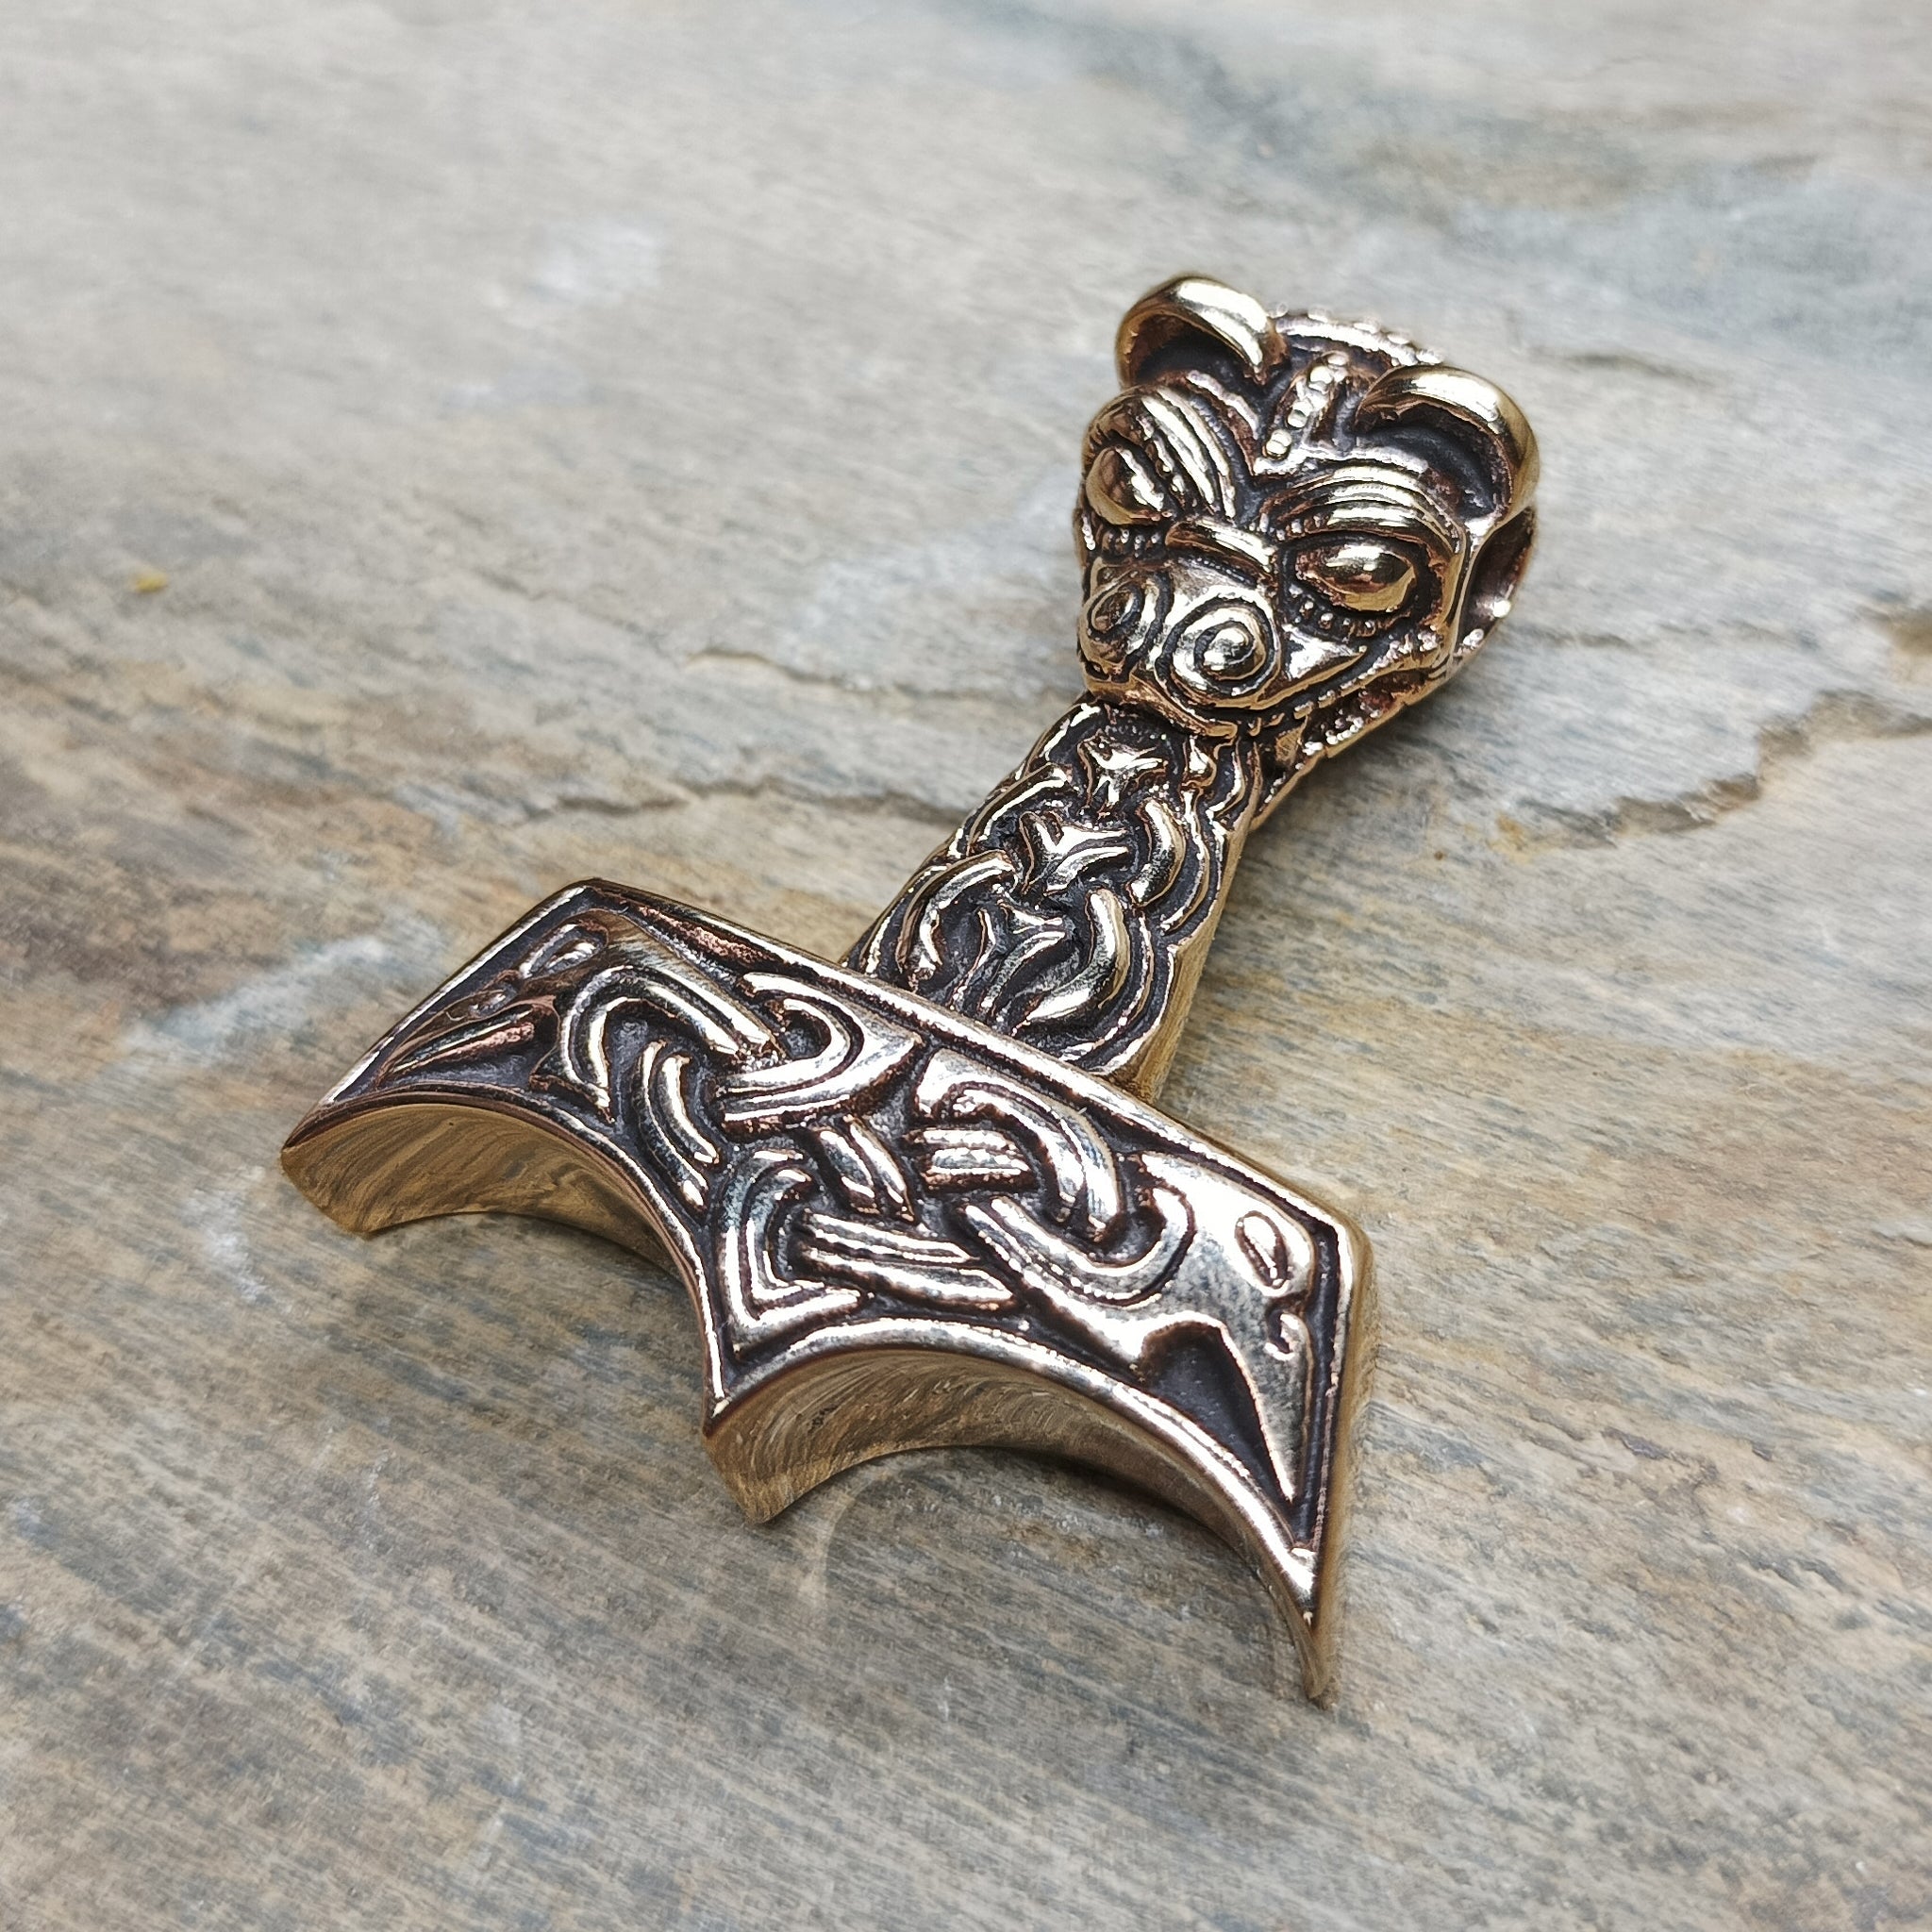 Bronze Large And Ferocious Thors Hammer Pendant on Rock - Angle View